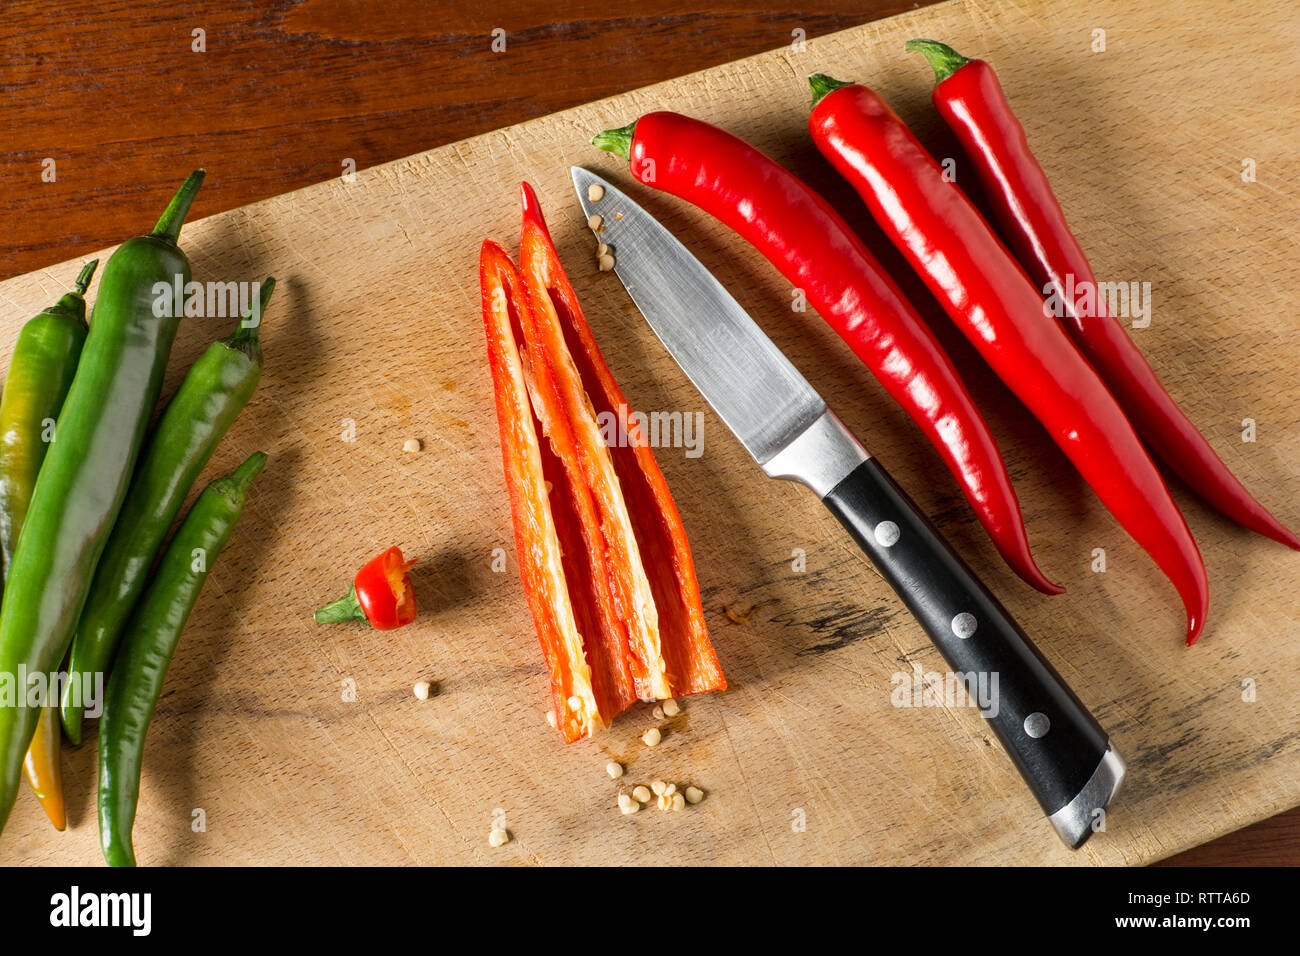 Deseeding Red and green hot chilli peppers on a carving board with knife Stock Photo